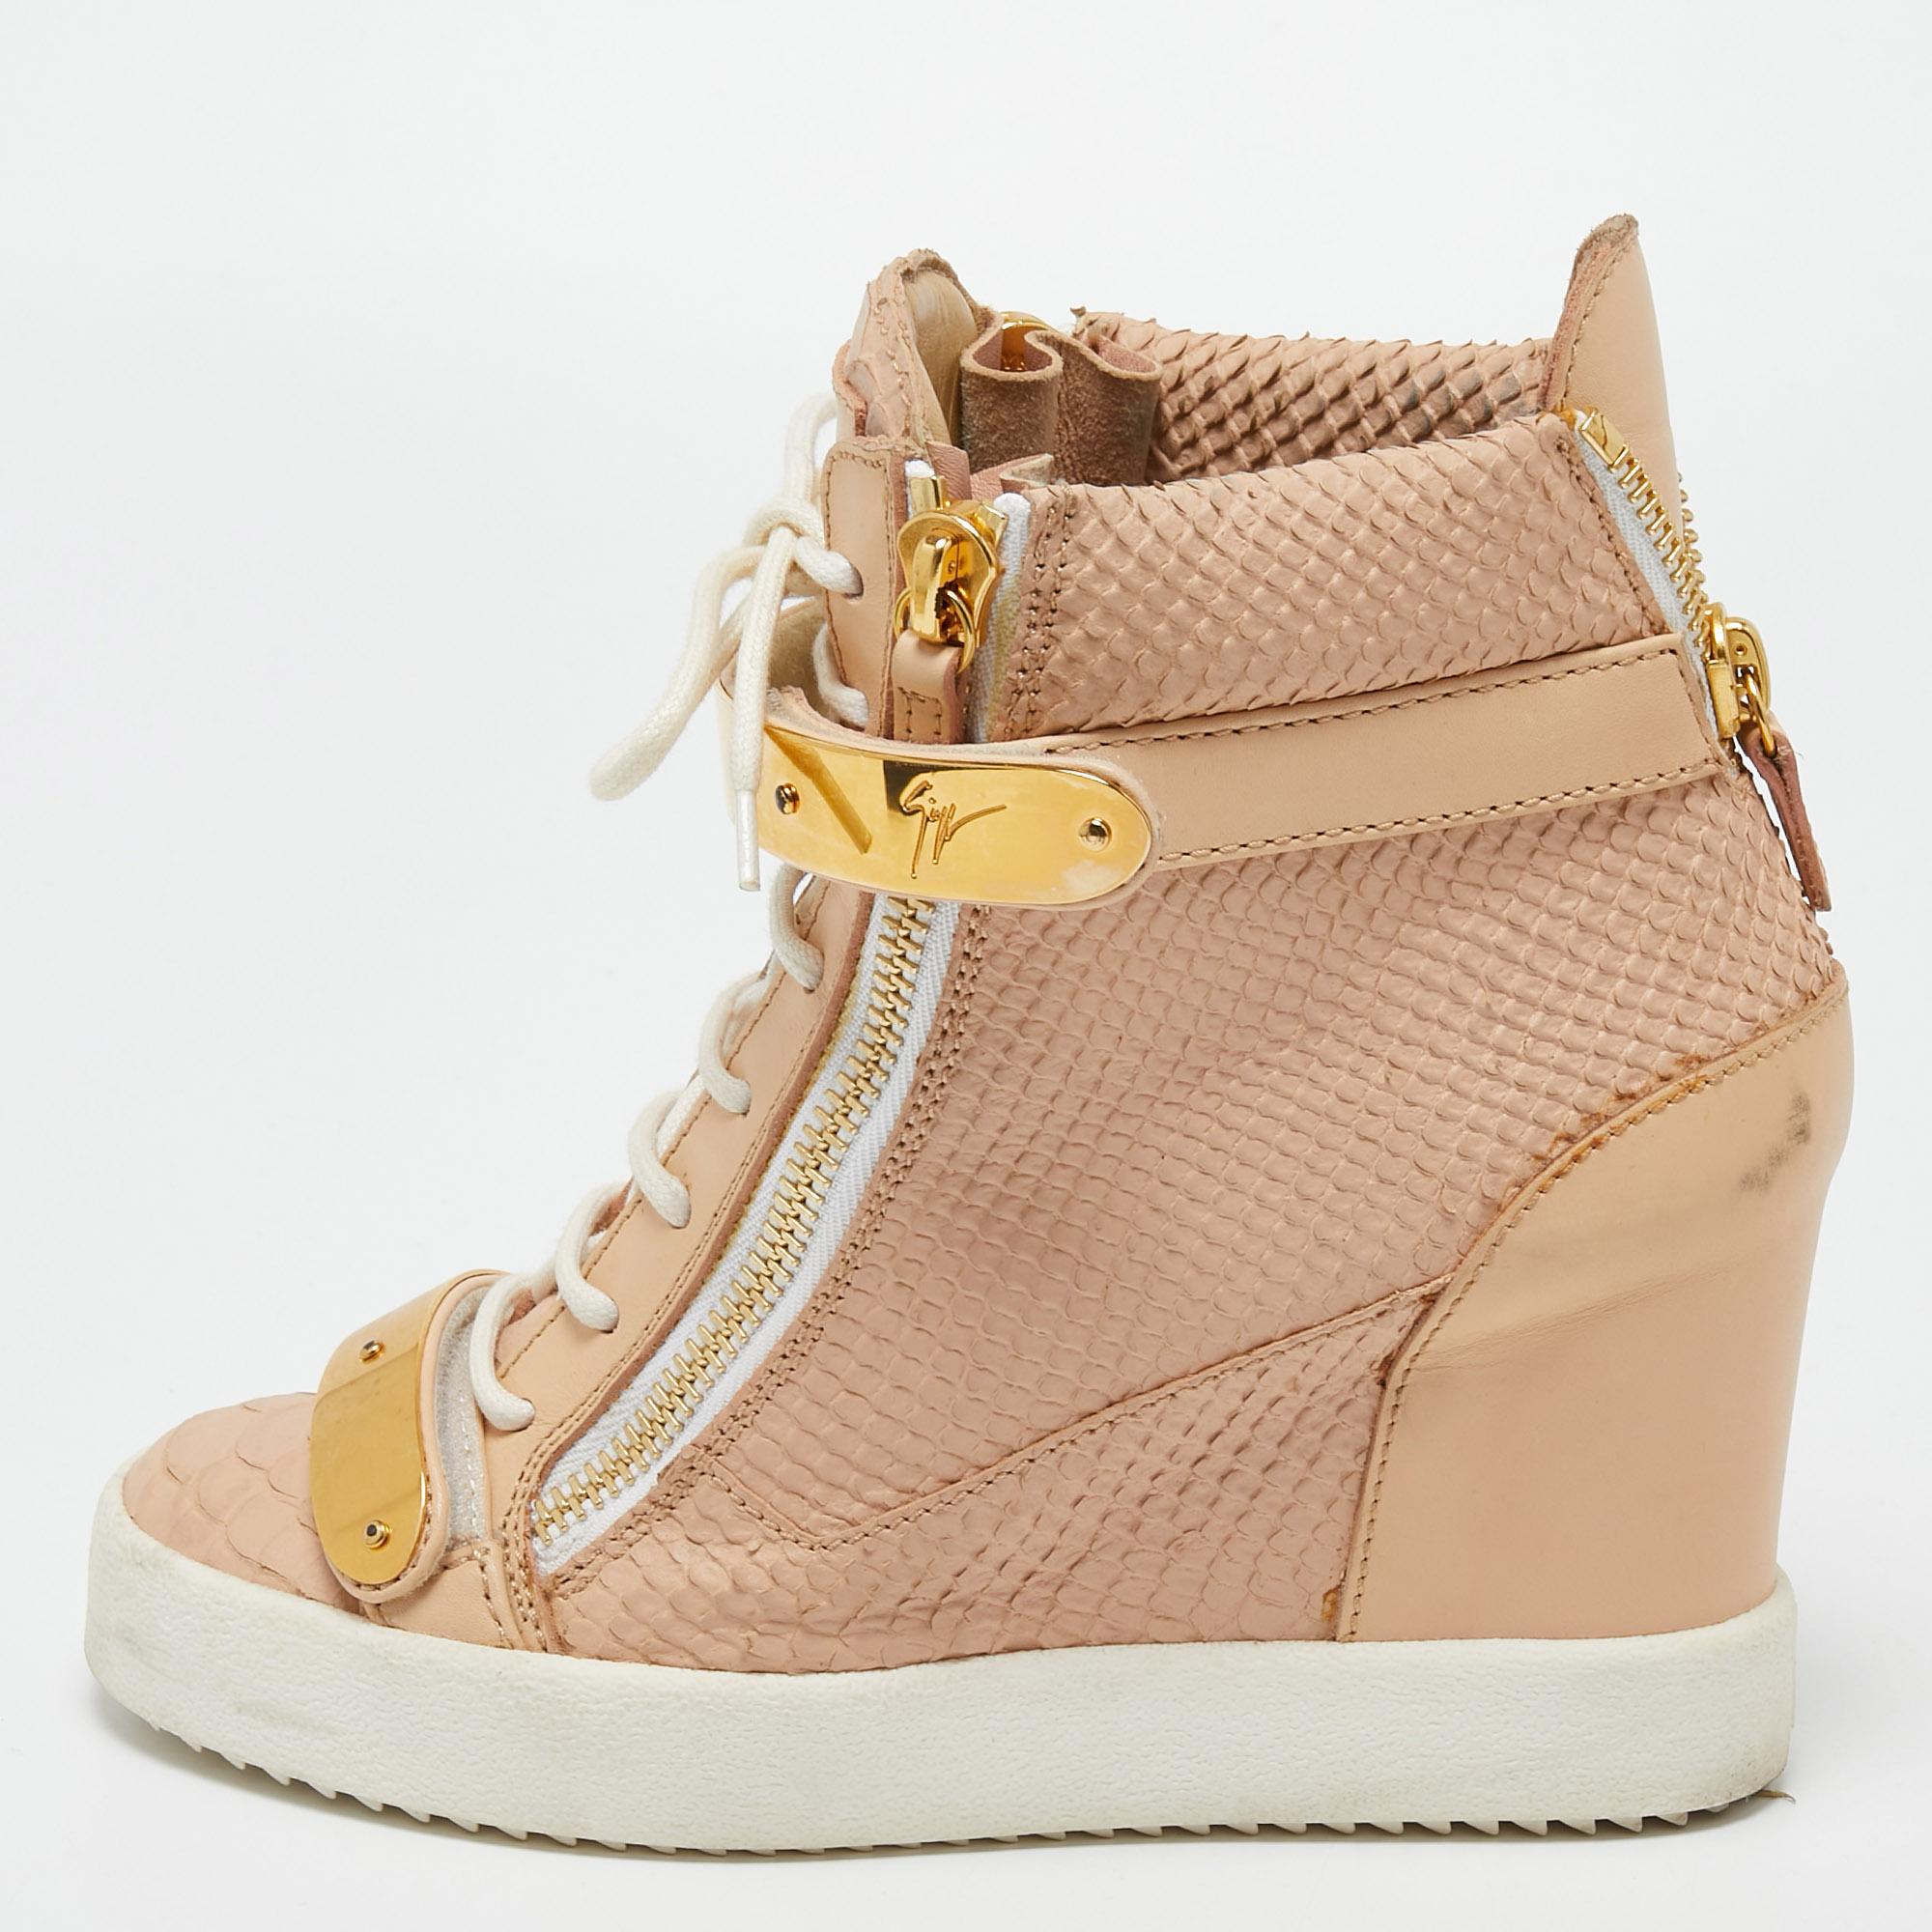 Giuseppe zanotti pink python embossed leather lorenz wedge sneakers size 39